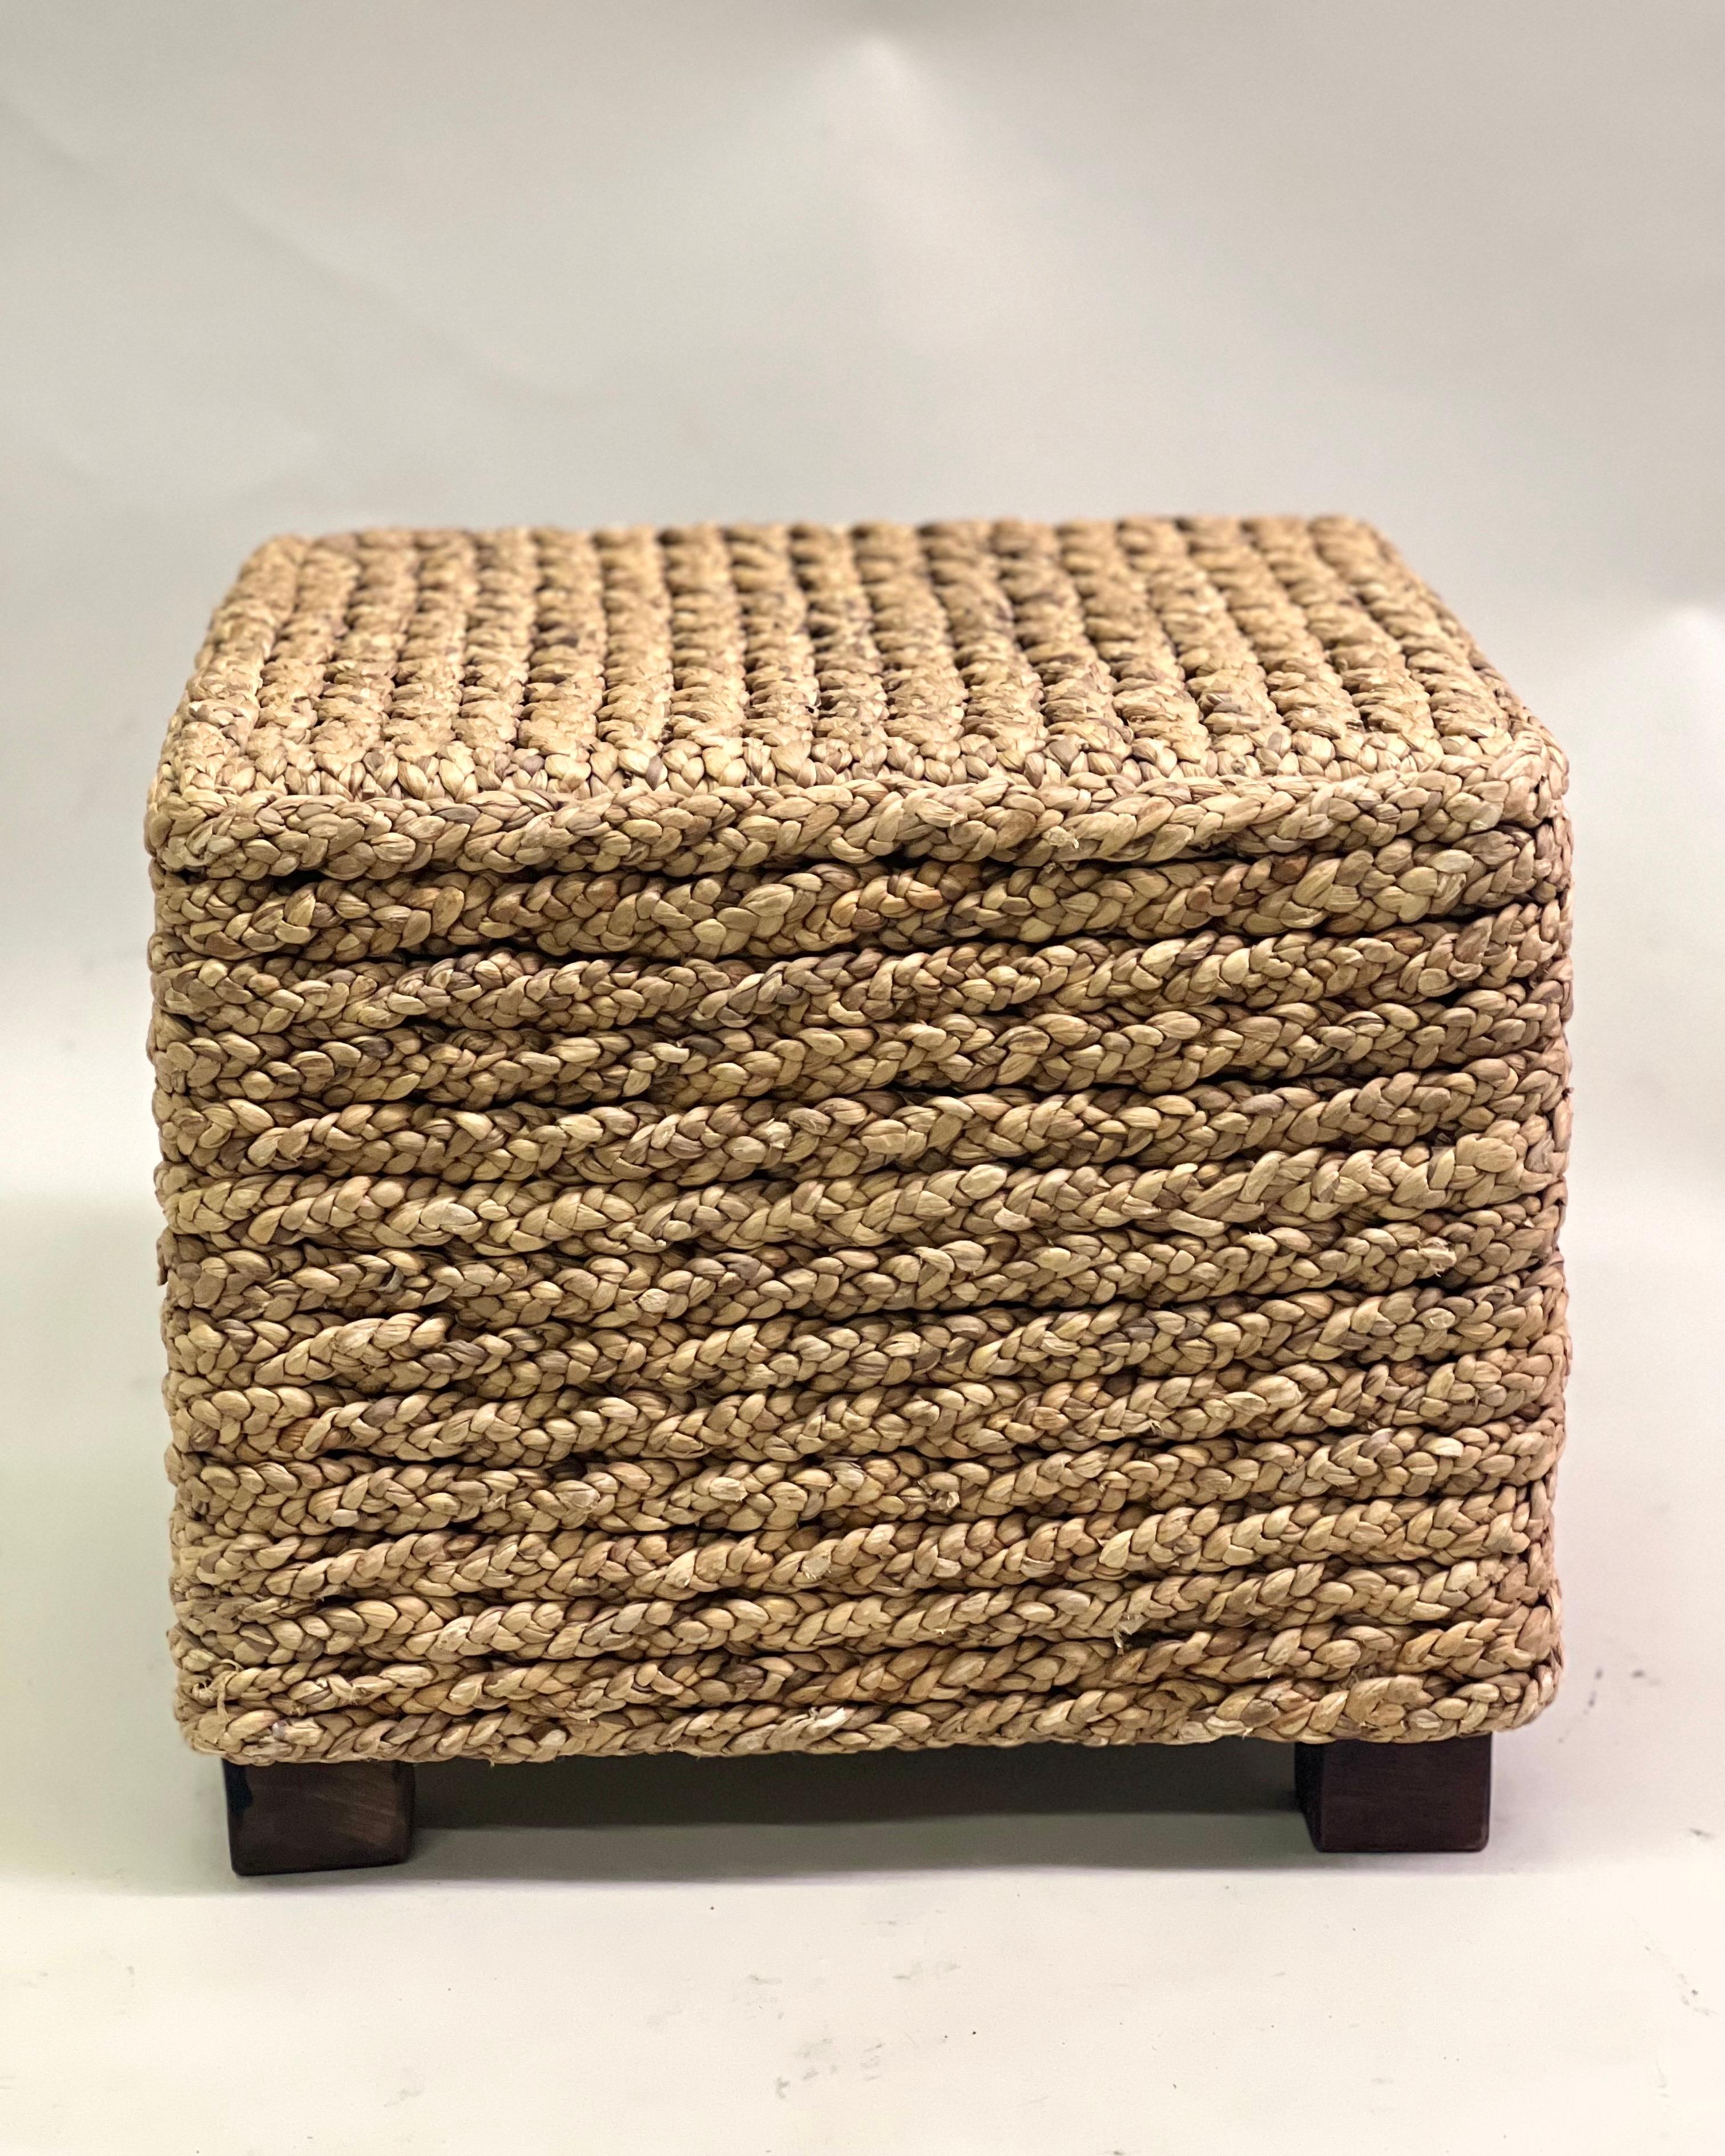 Hand-Crafted Pair of French Mid-Century Rope Stools / Benches by Adrien Audoux & Frida Minet For Sale